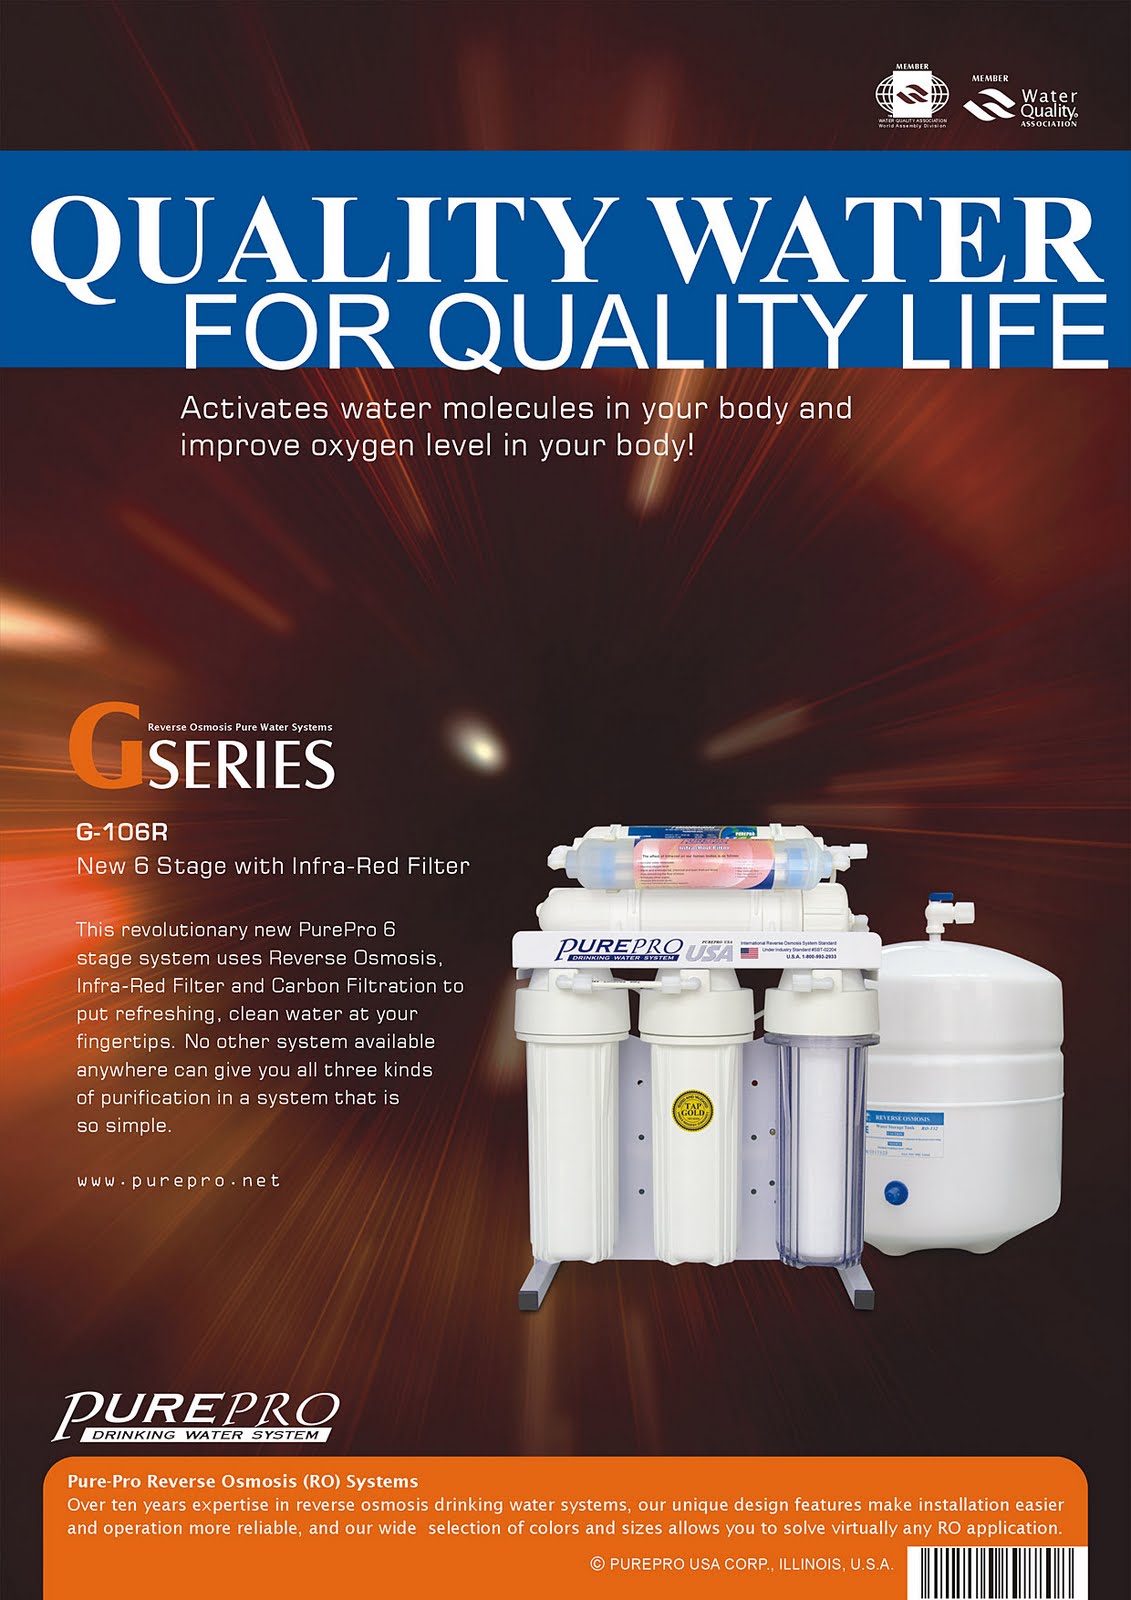 PurePro® G-106R Reverse Osmosis Water Filtration System